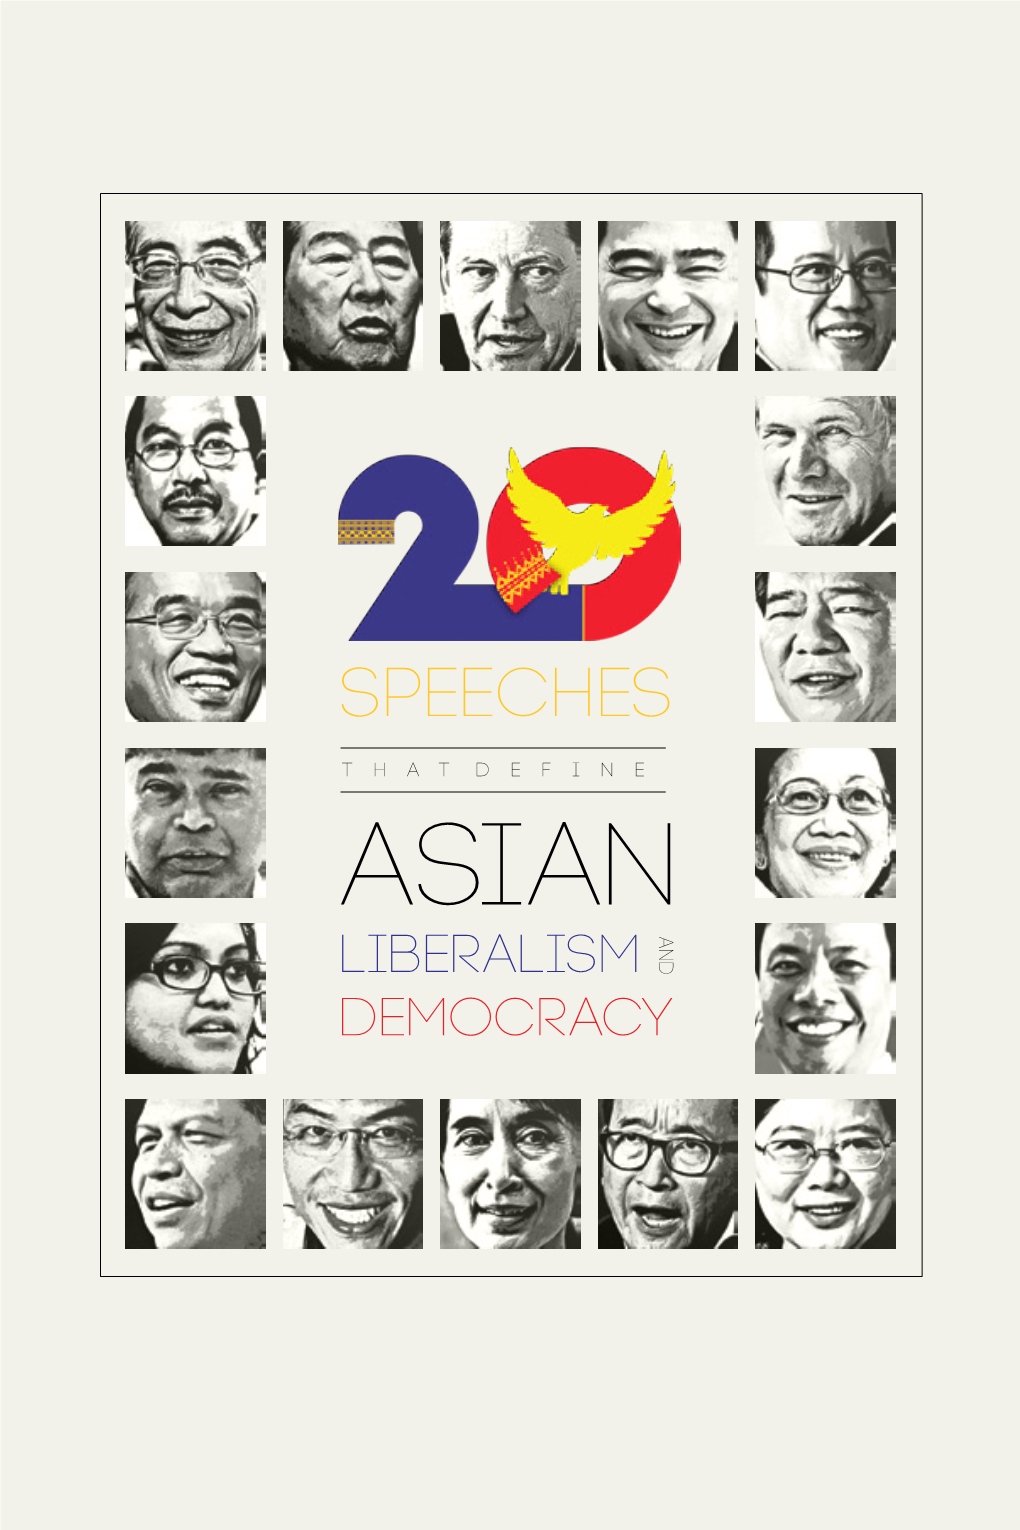 20 Speeches That Define Asian Liberalism and Democracy